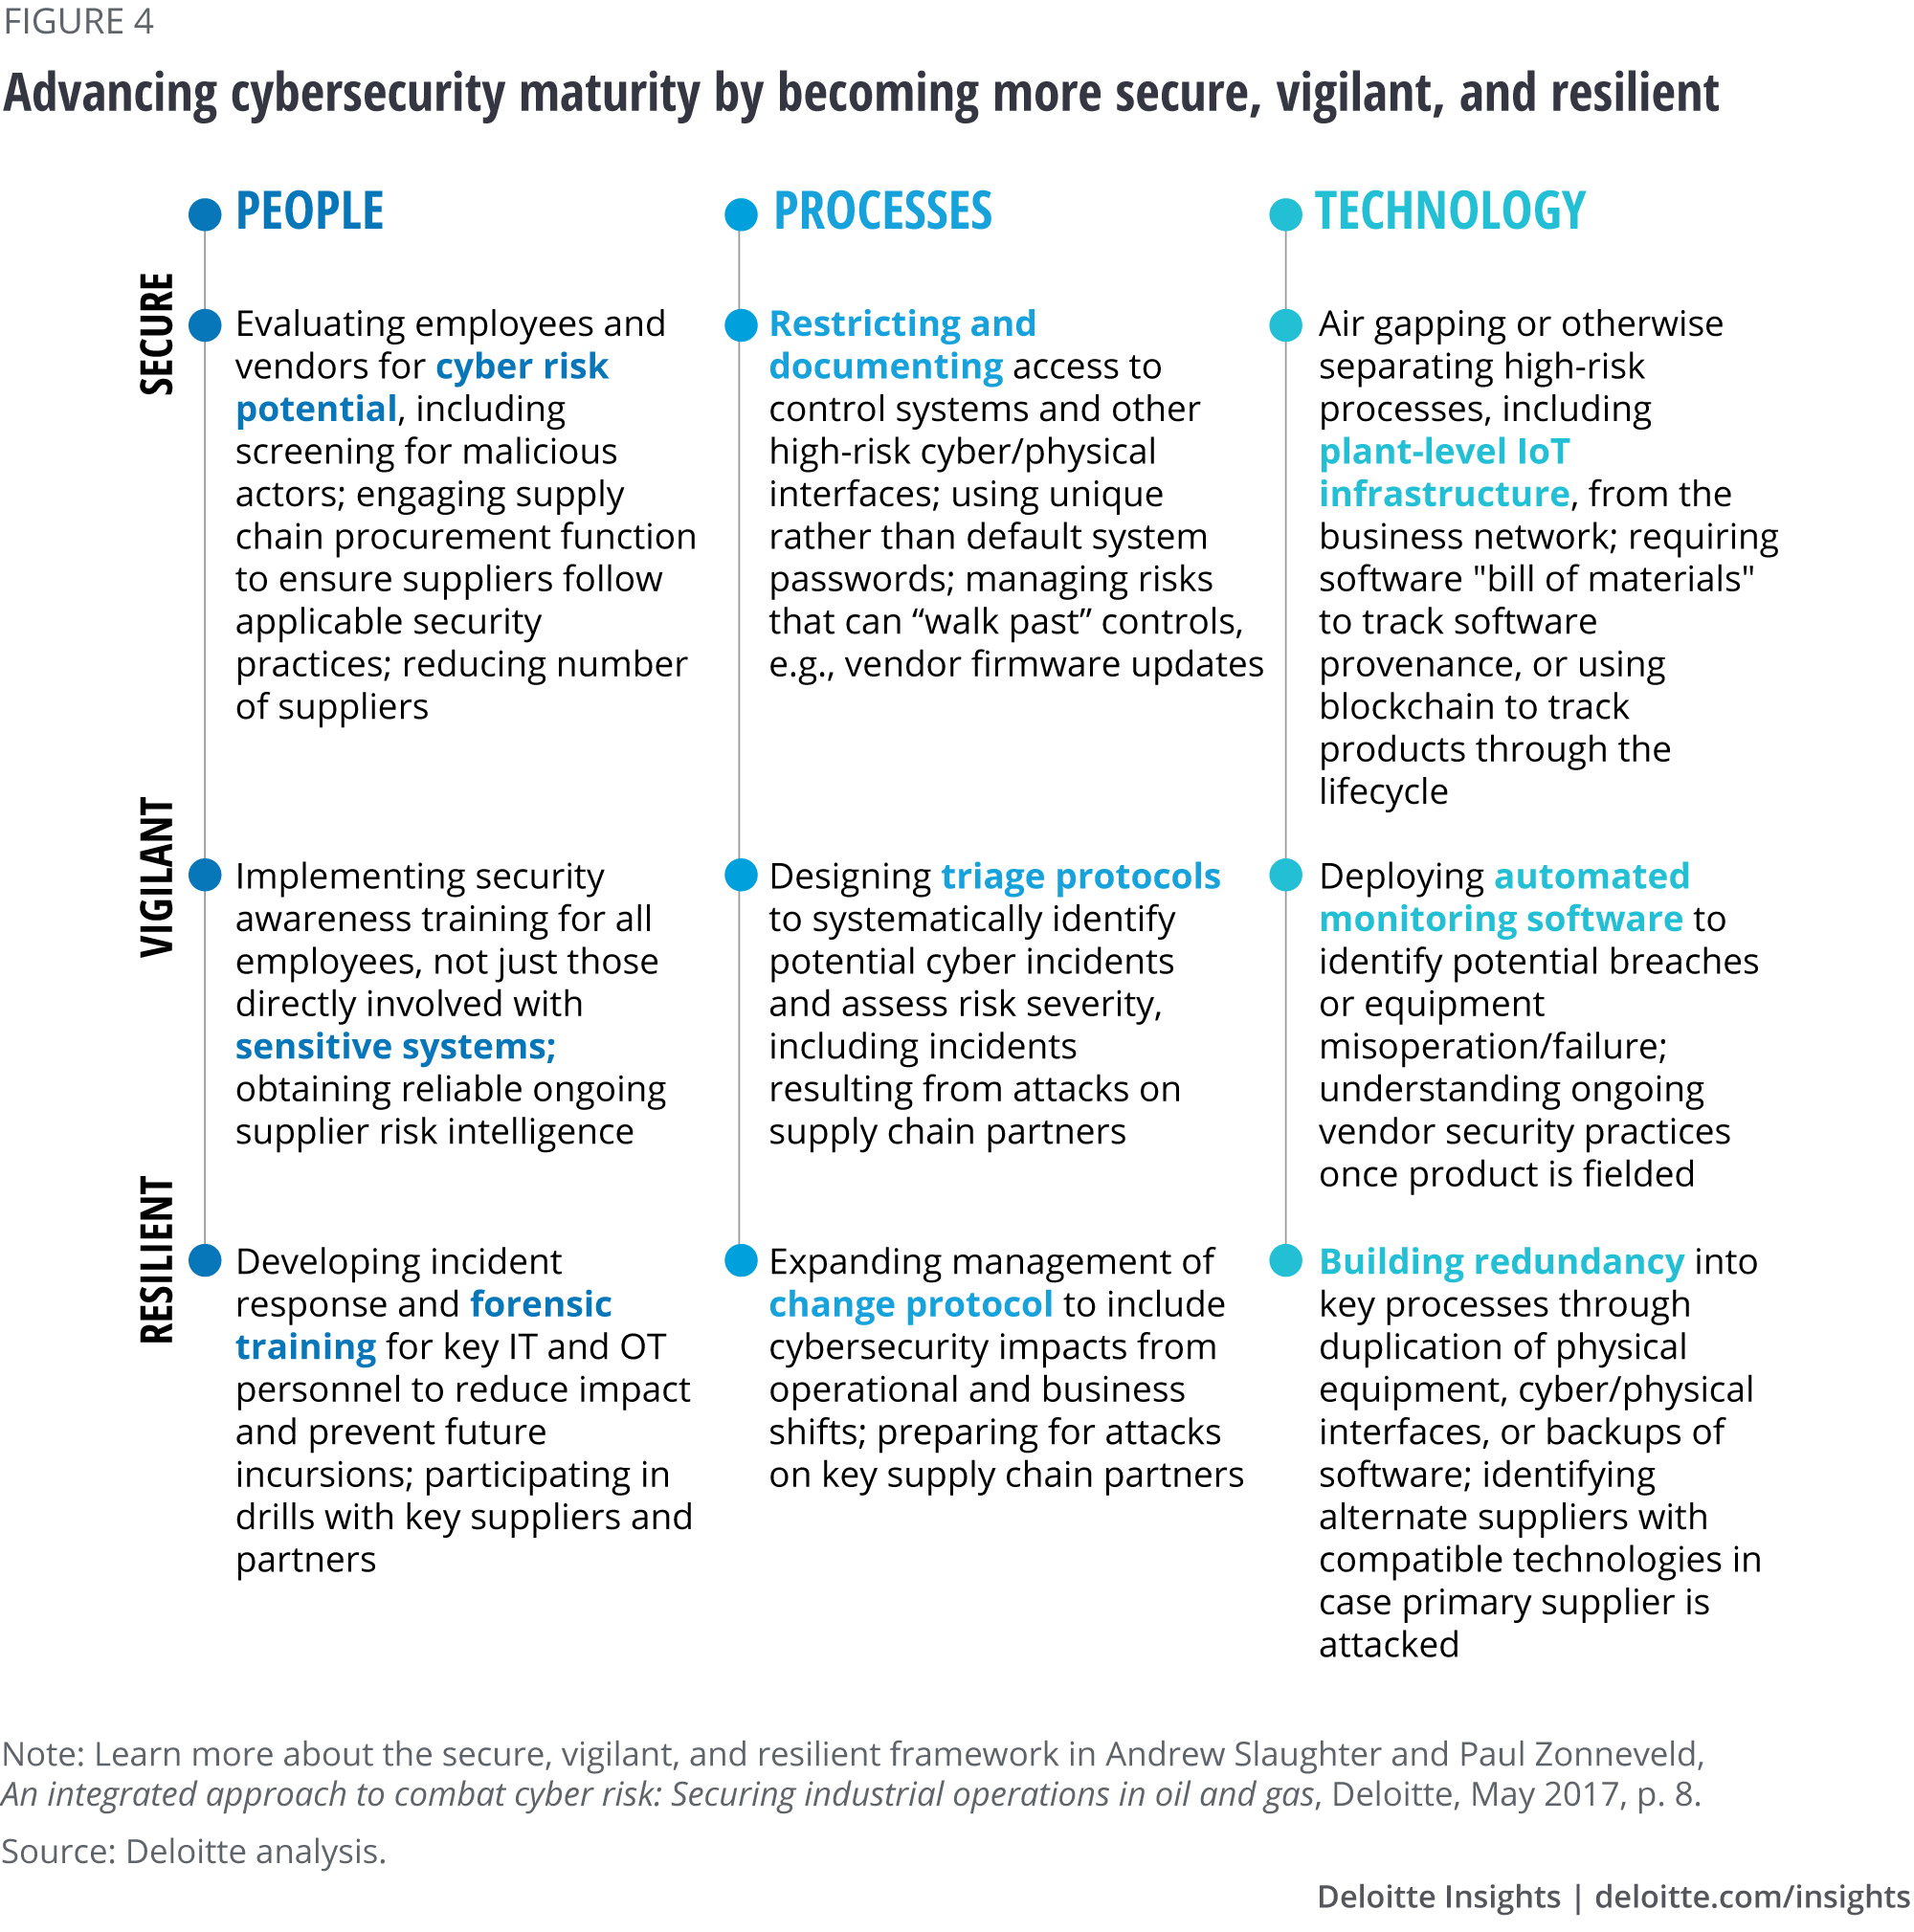 Advancing cybersecurity maturity by becoming more secure, vigilant, and resilient